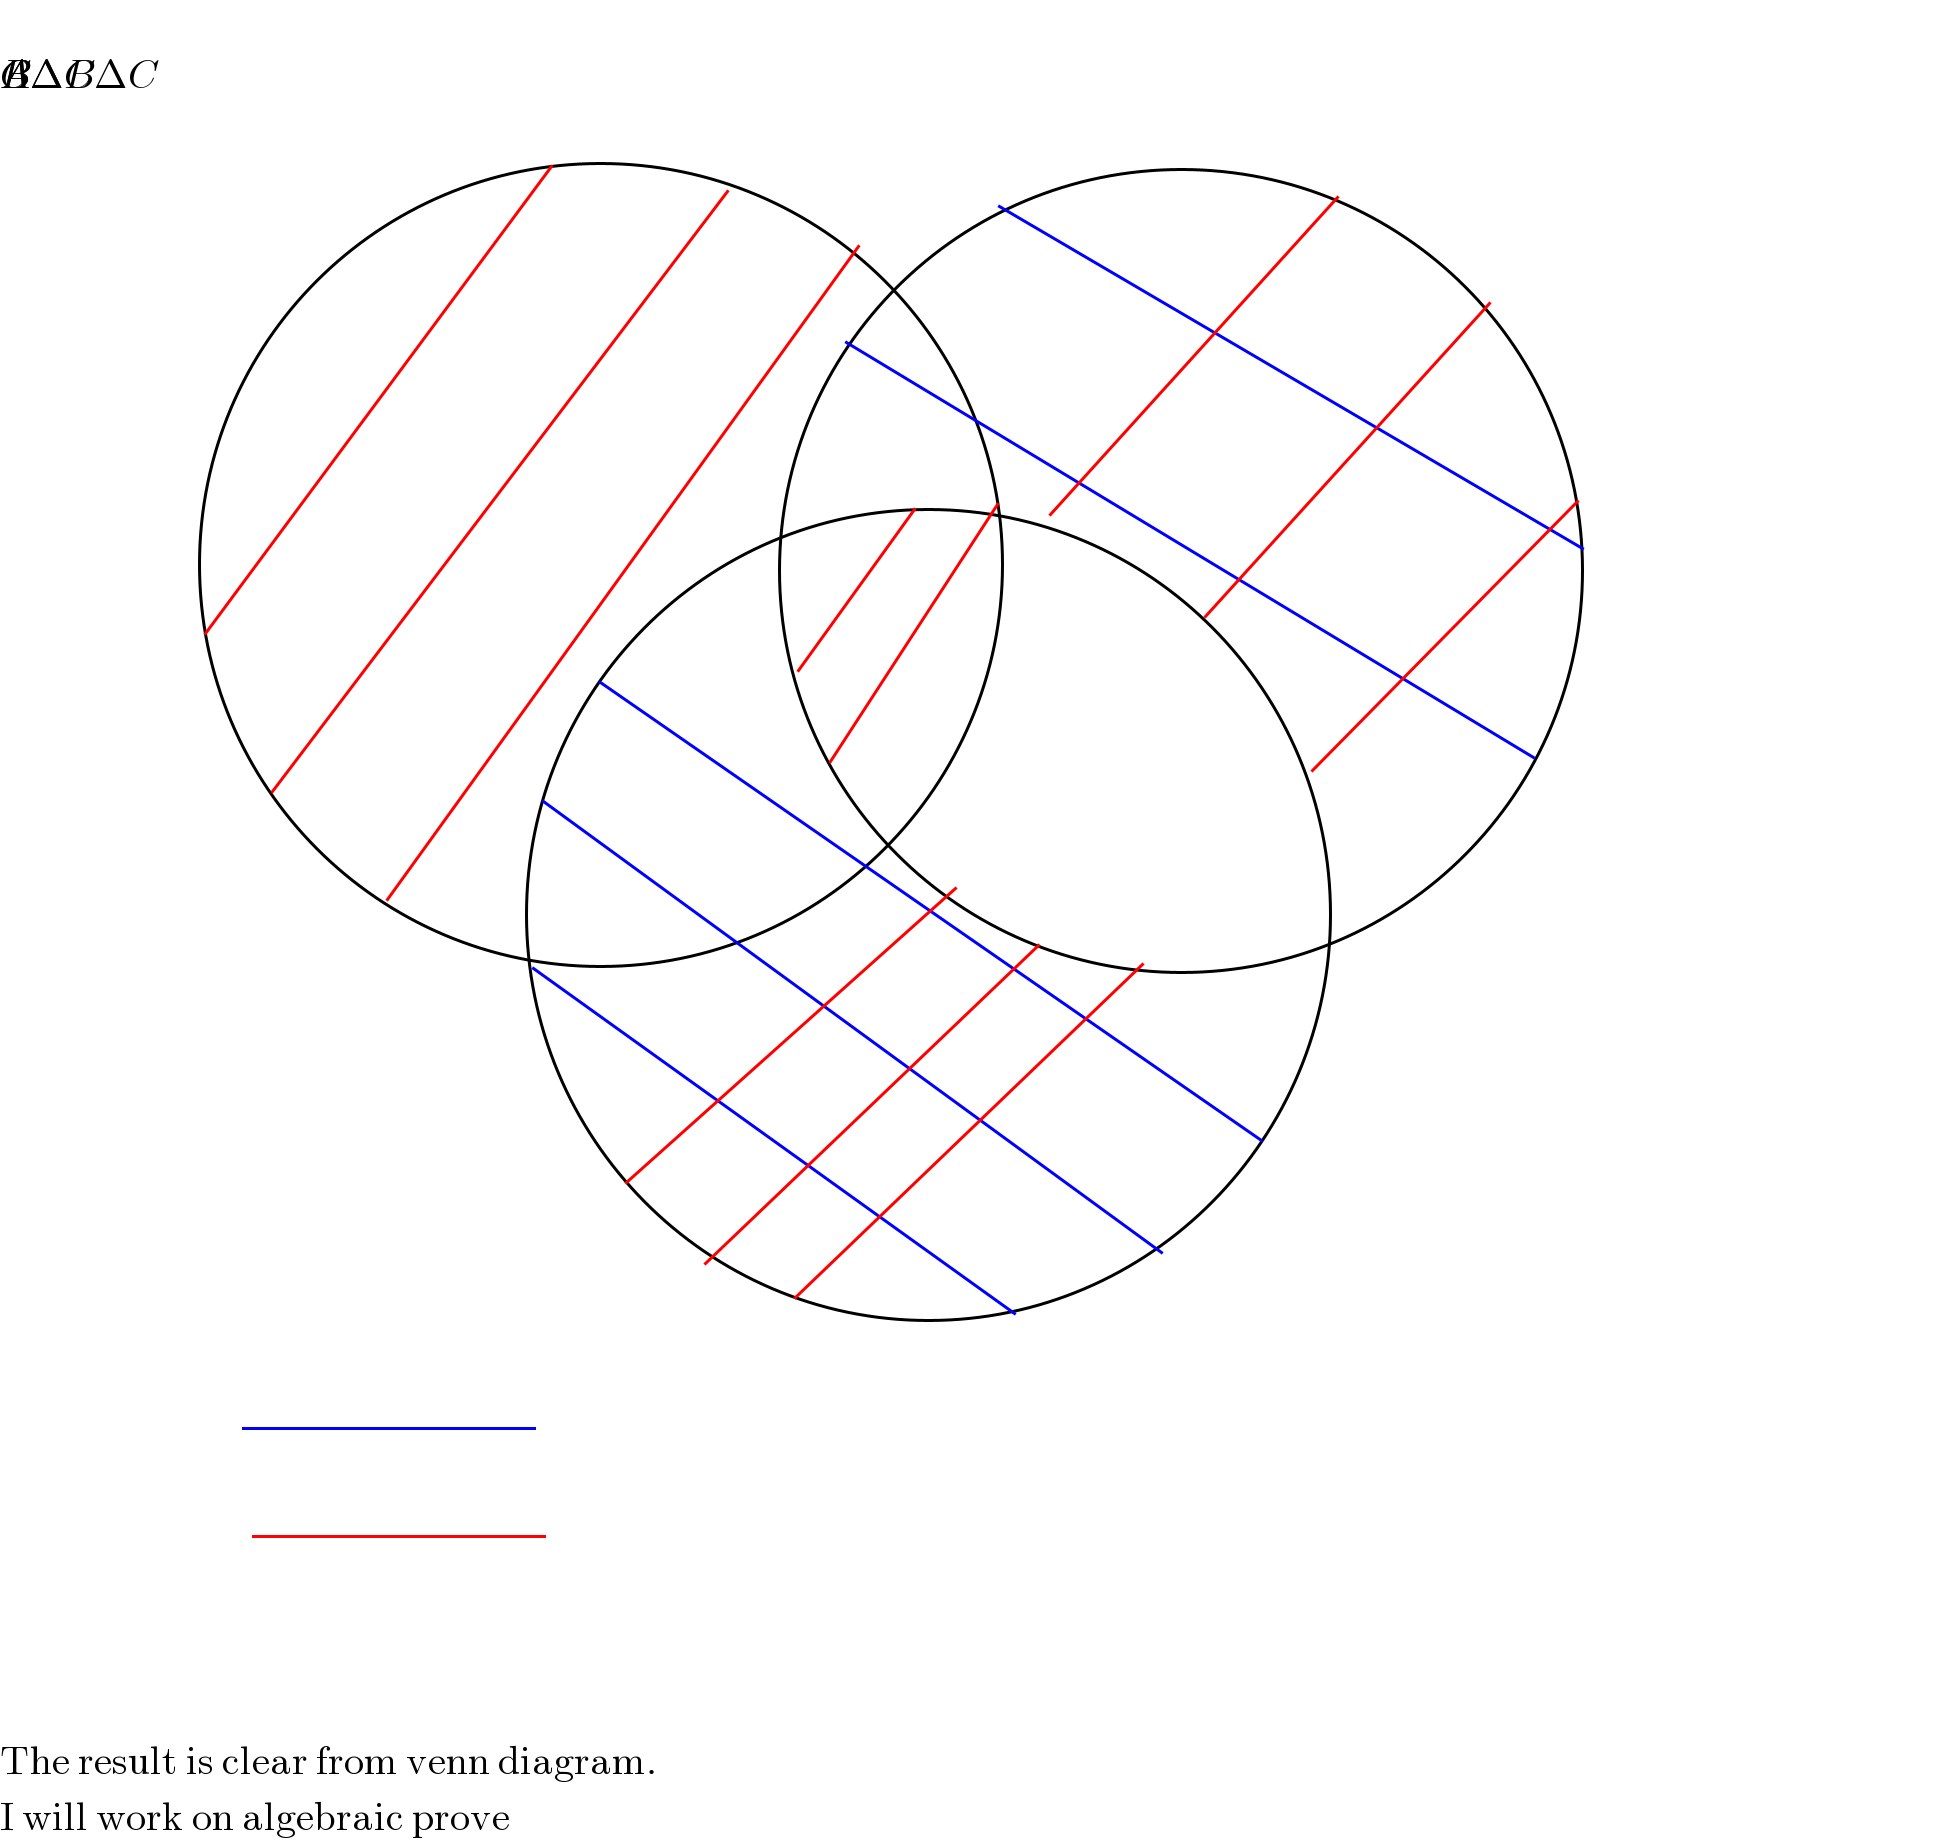     The result is clear from venn diagram.  I will work on algebraic prove   